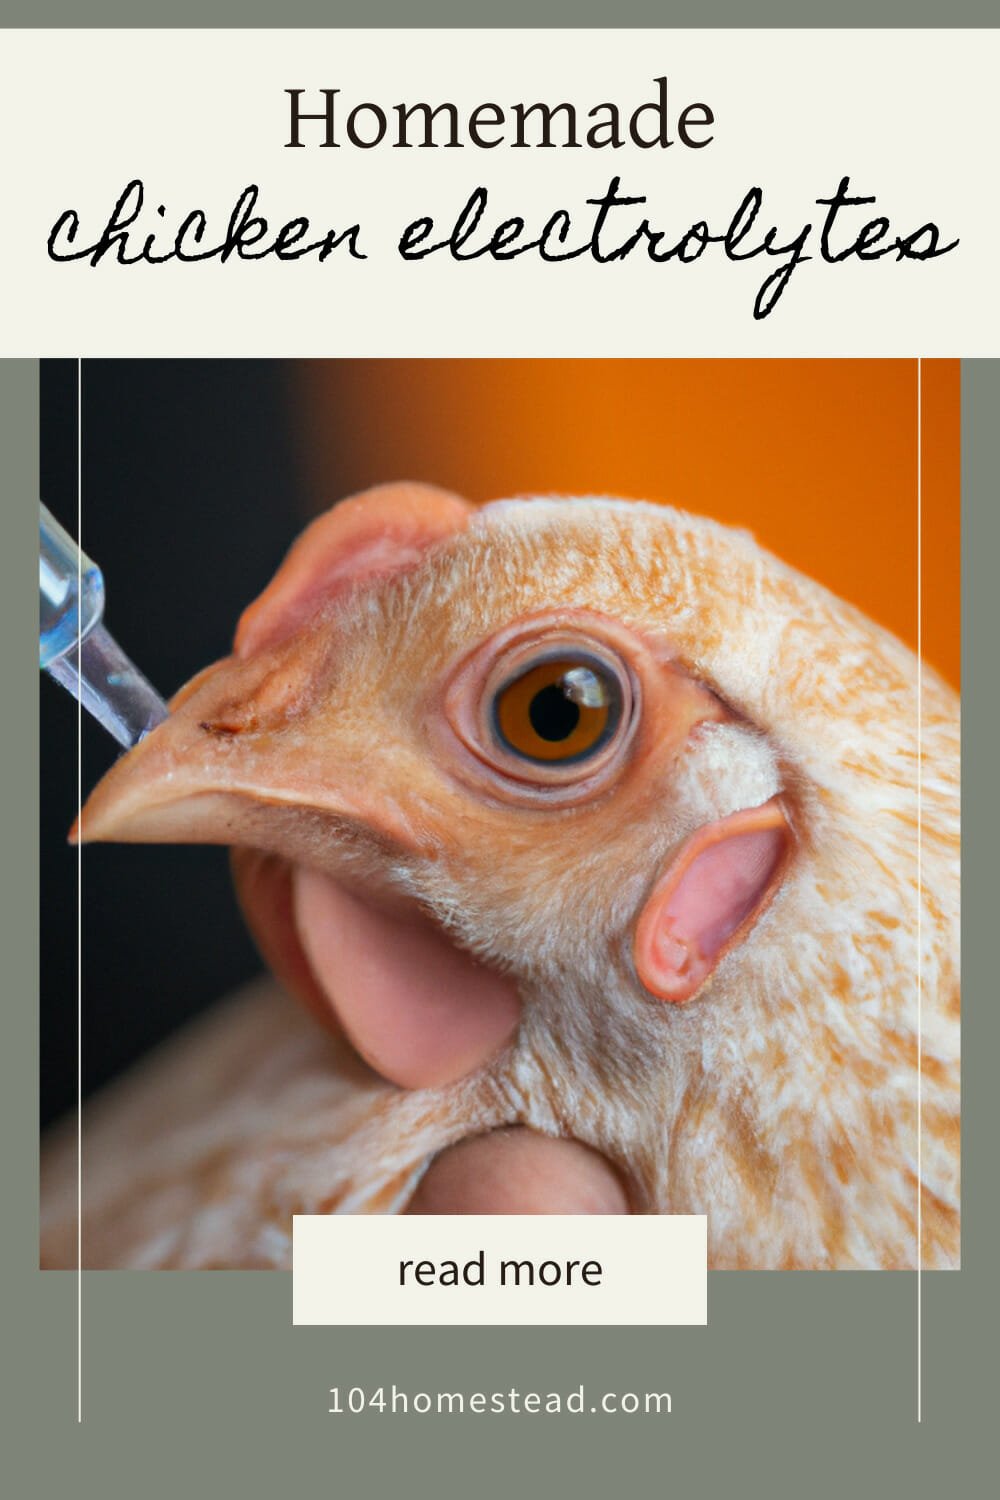 A pinterest-friendly graphic for my homemade electrolyte recipe for chickens.